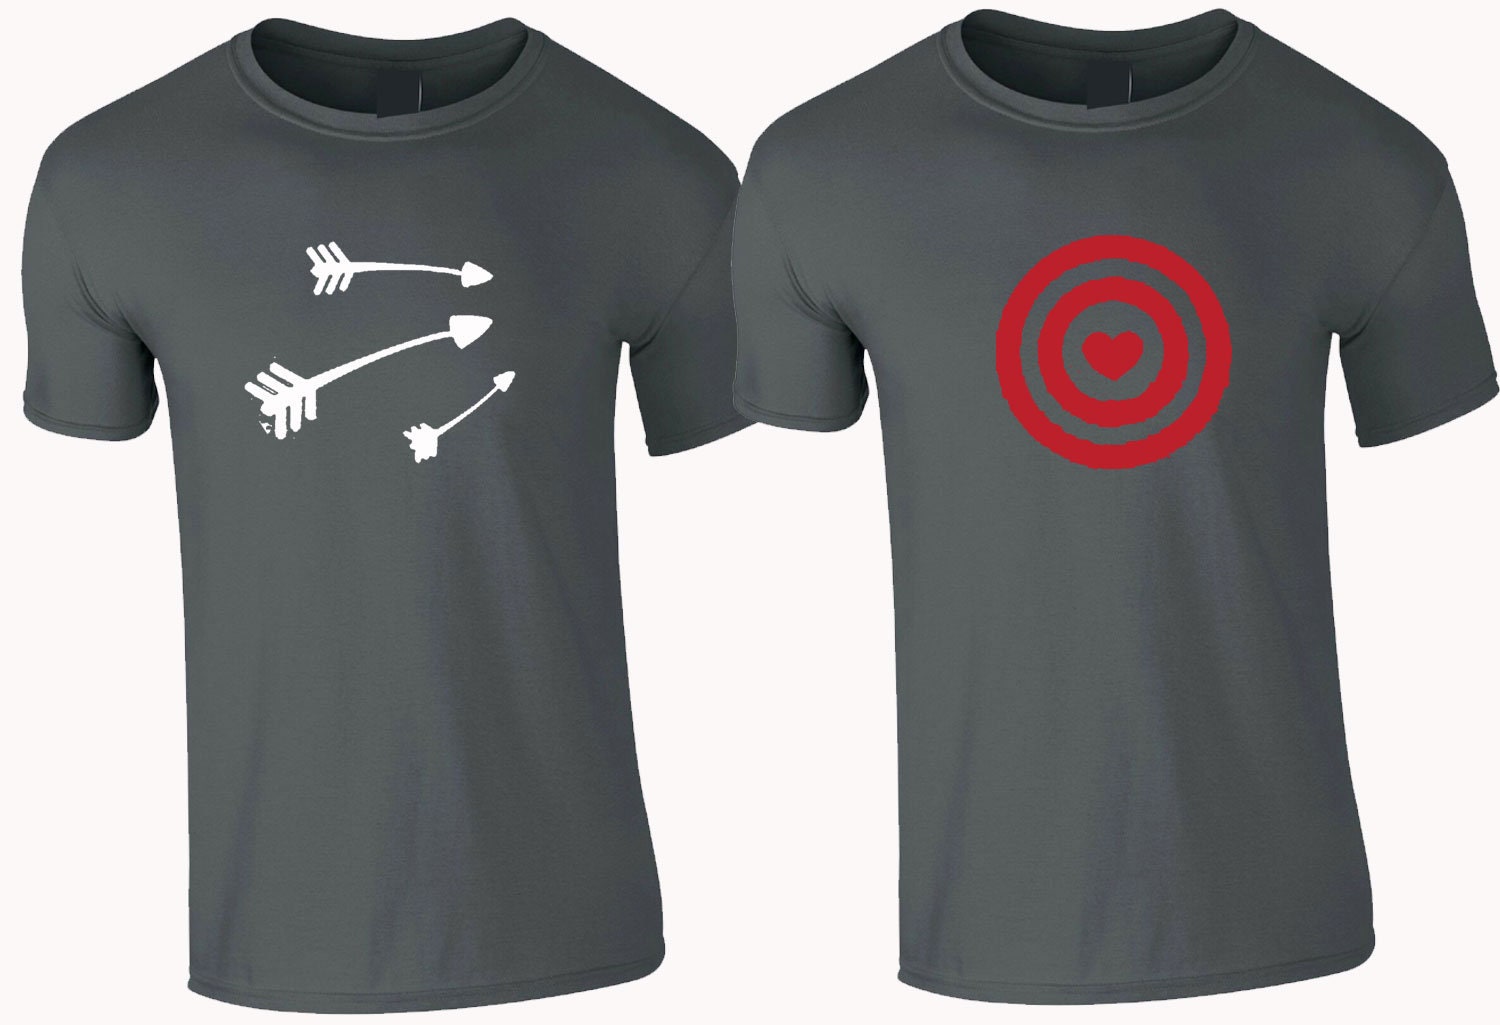 Couple Matching Shirts Archery Love Arrow in Target Heart | Etsy